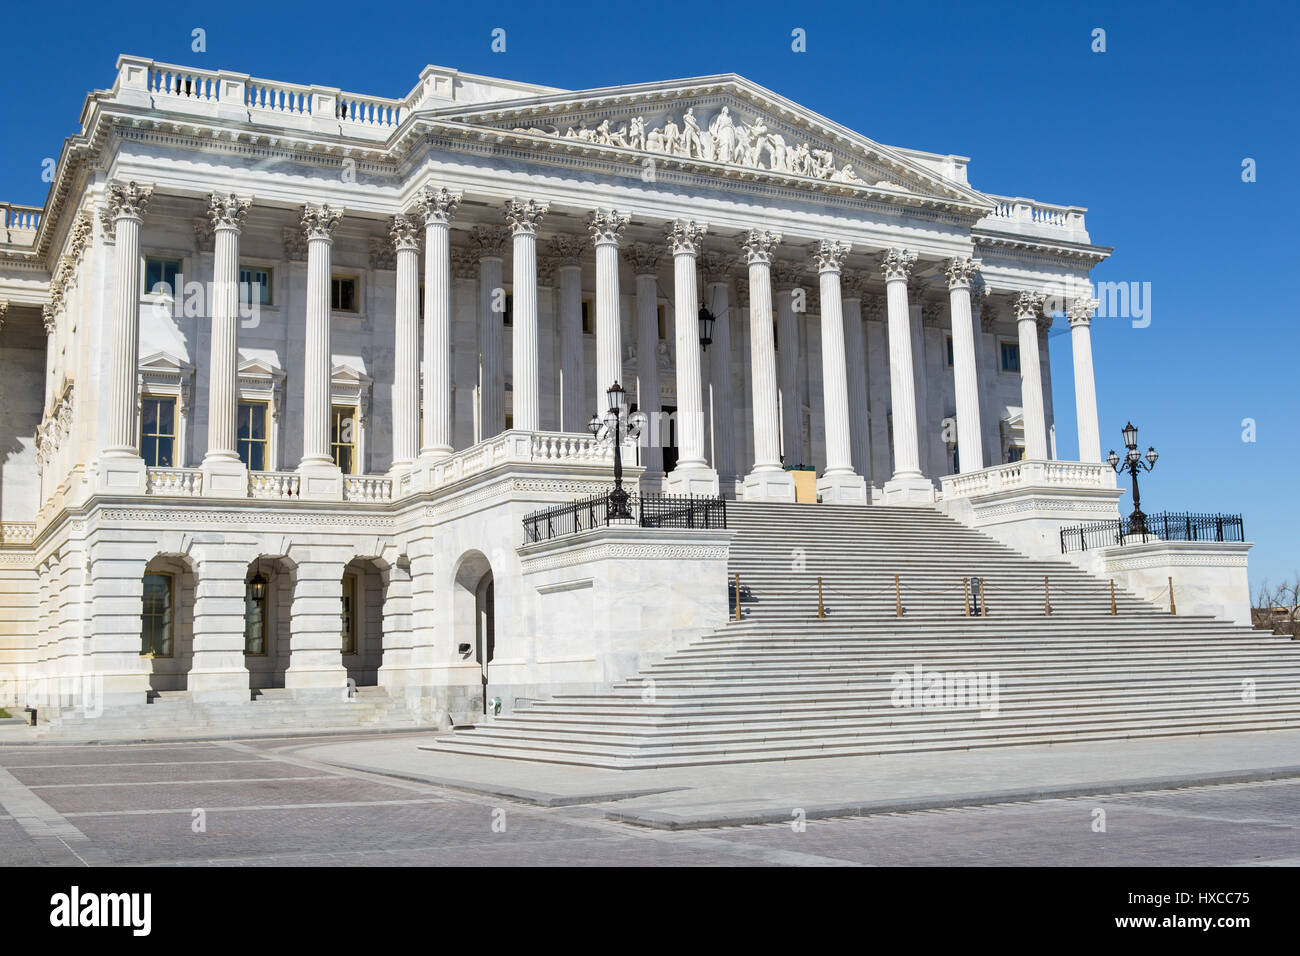 The north wing (Senate wing) of the U.S. Capitol Building in Washington, DC. Stock Photo